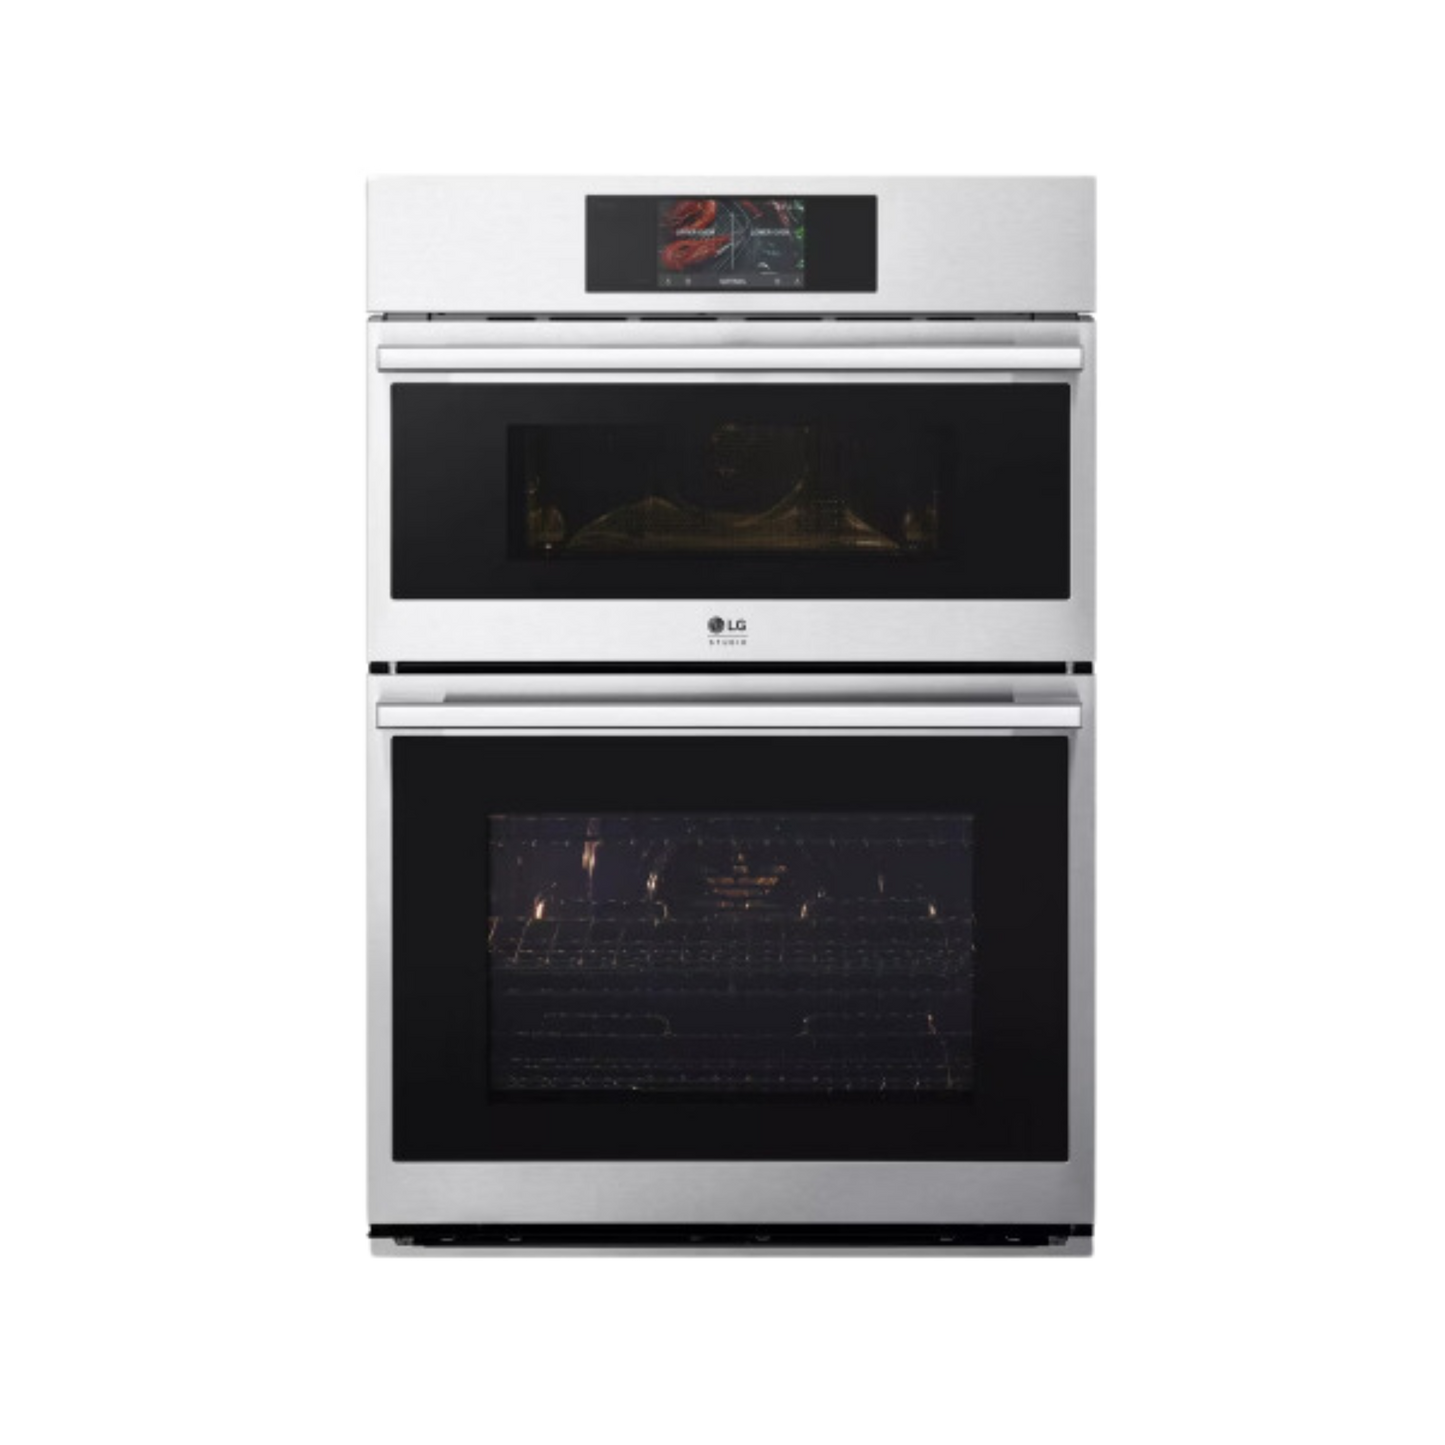 LG STUDIO 1.7/4.7 cu. ft. Combination Double Wall Oven with Air Fry WCES6428F